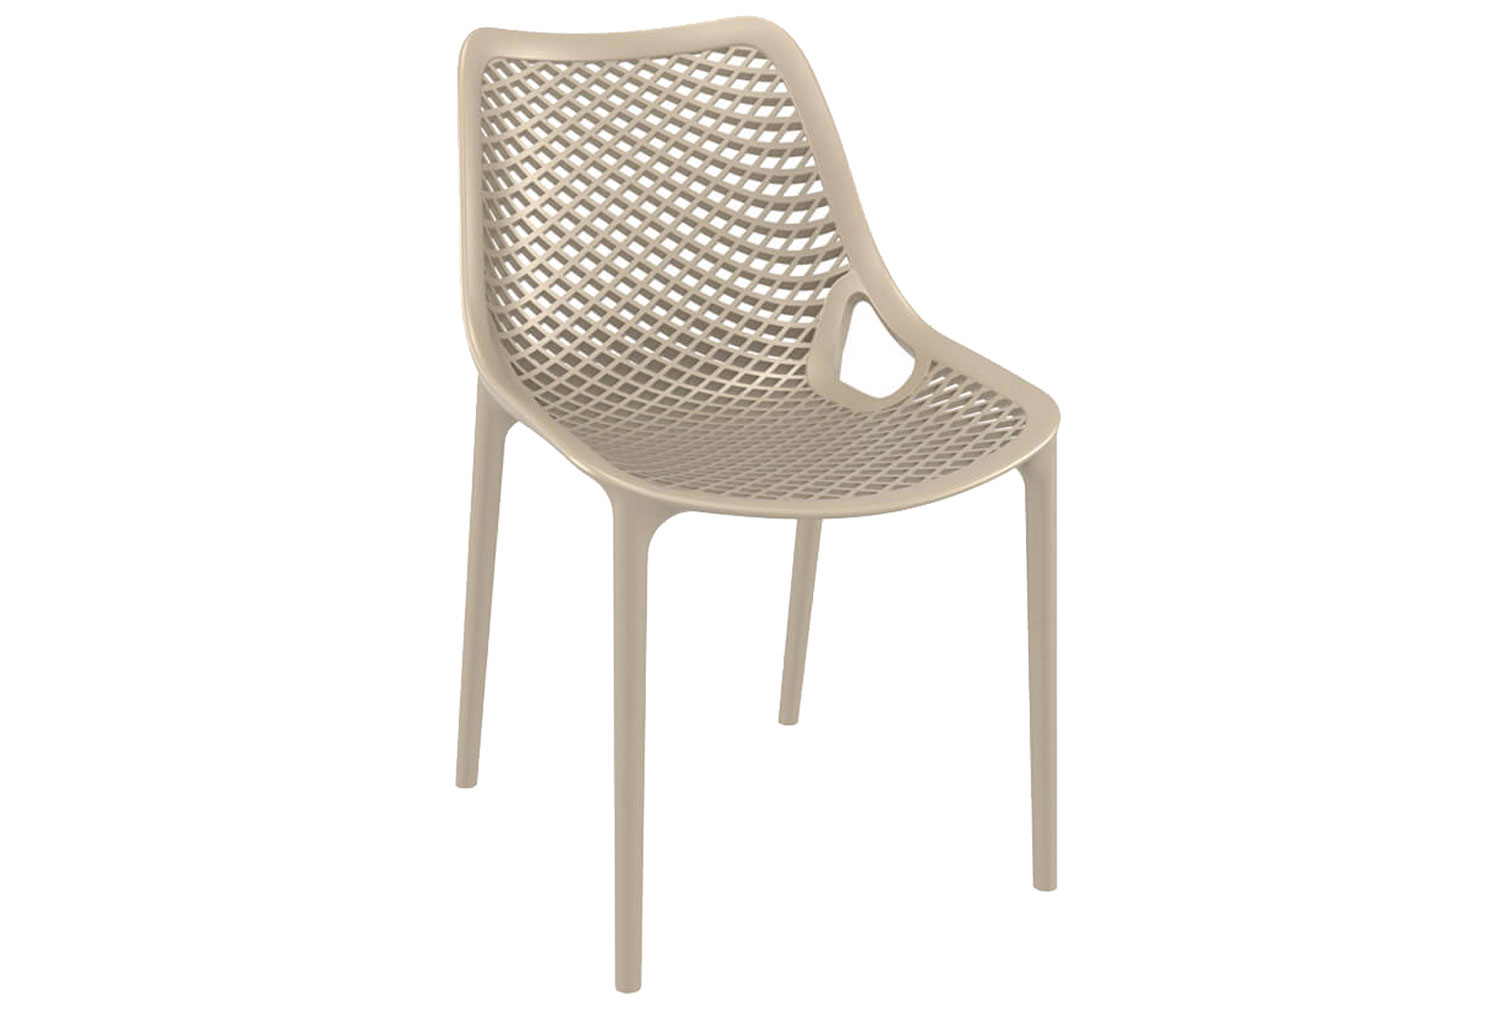 Qty 2 - Stawell Stacking Side Chair, Taupe